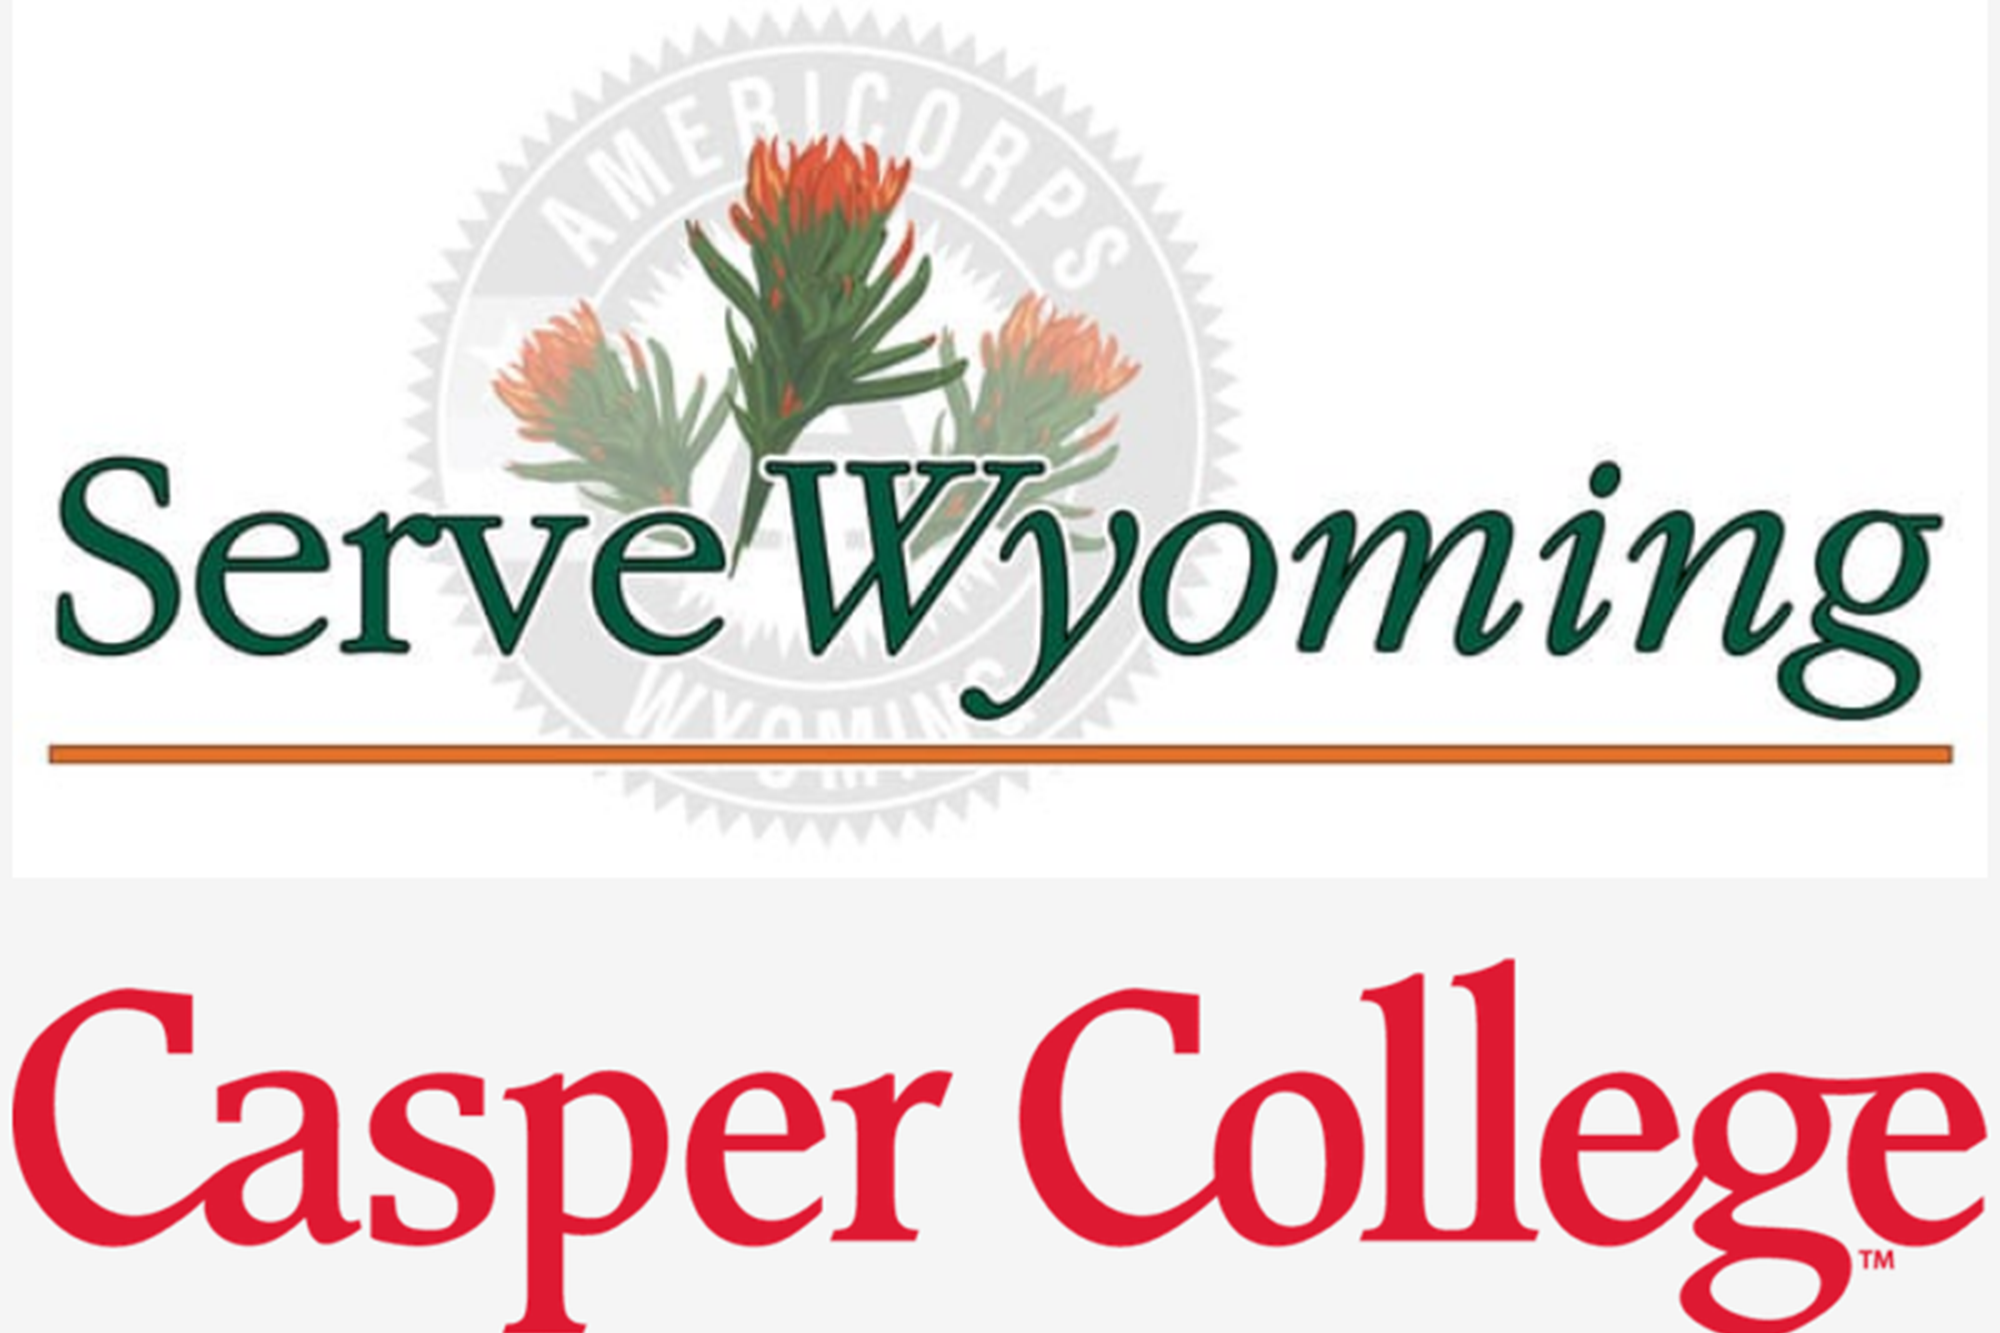 Image combining the logo of Serve Wyoming and Casper College